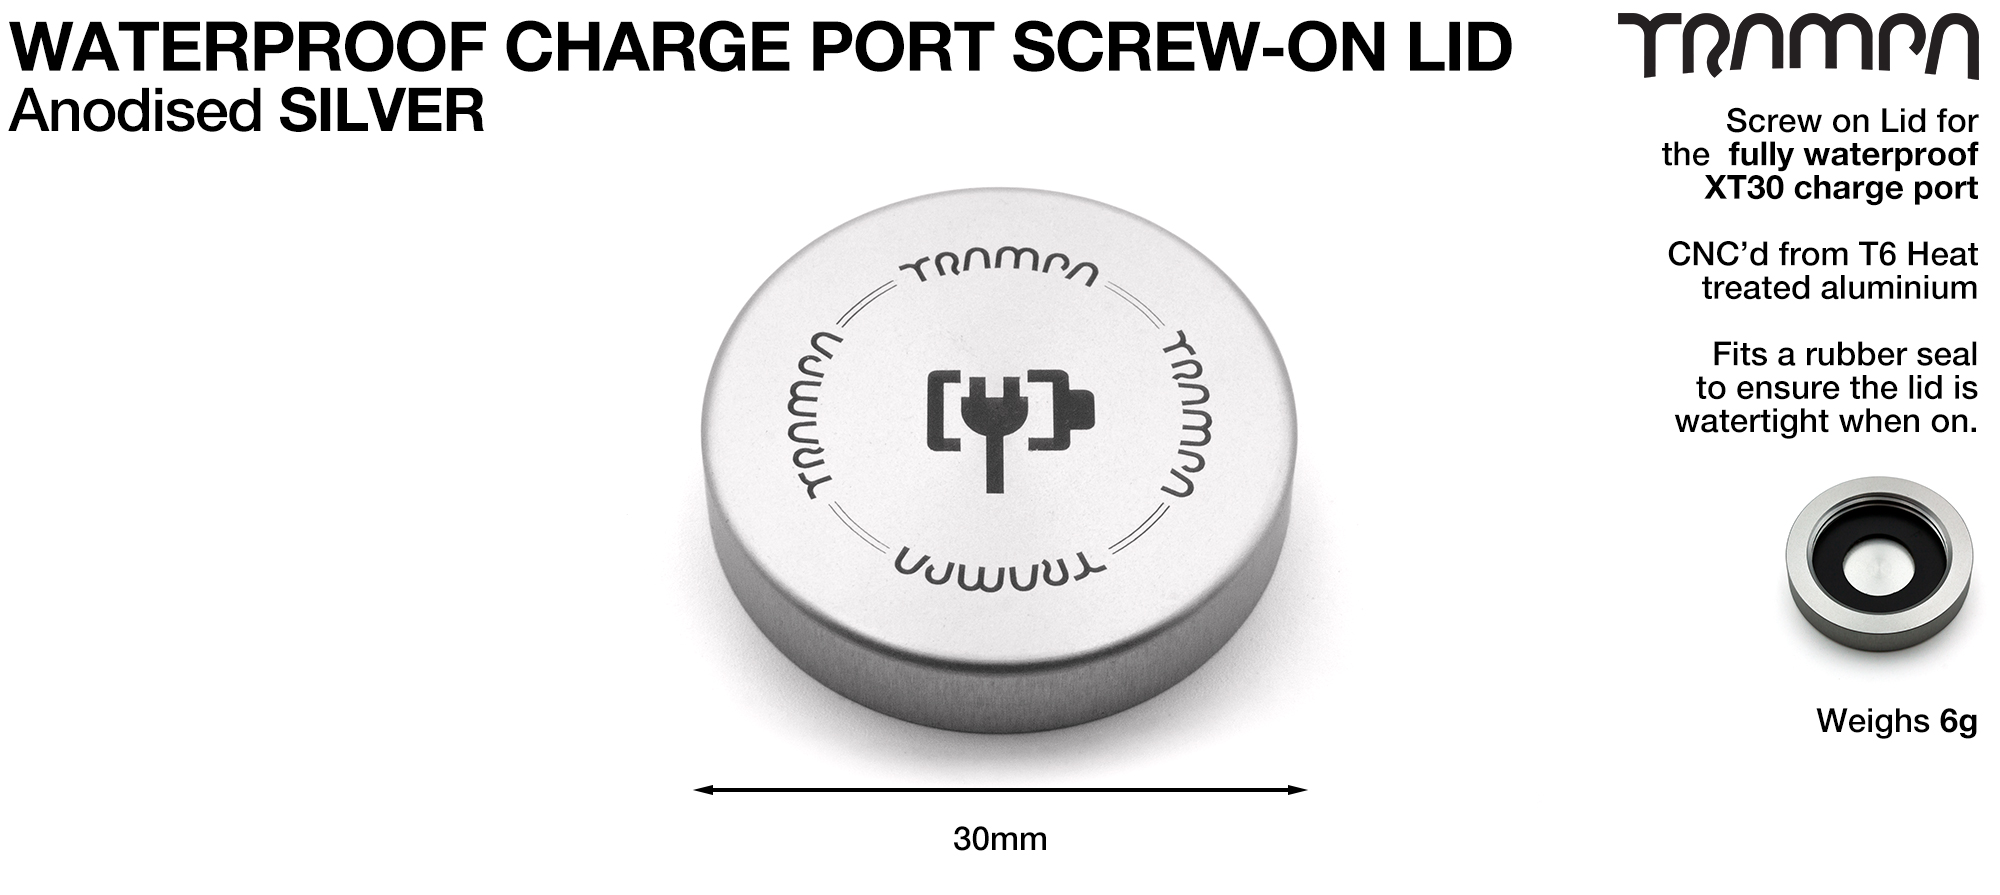 Charge Point TOP - Anodised SILVER